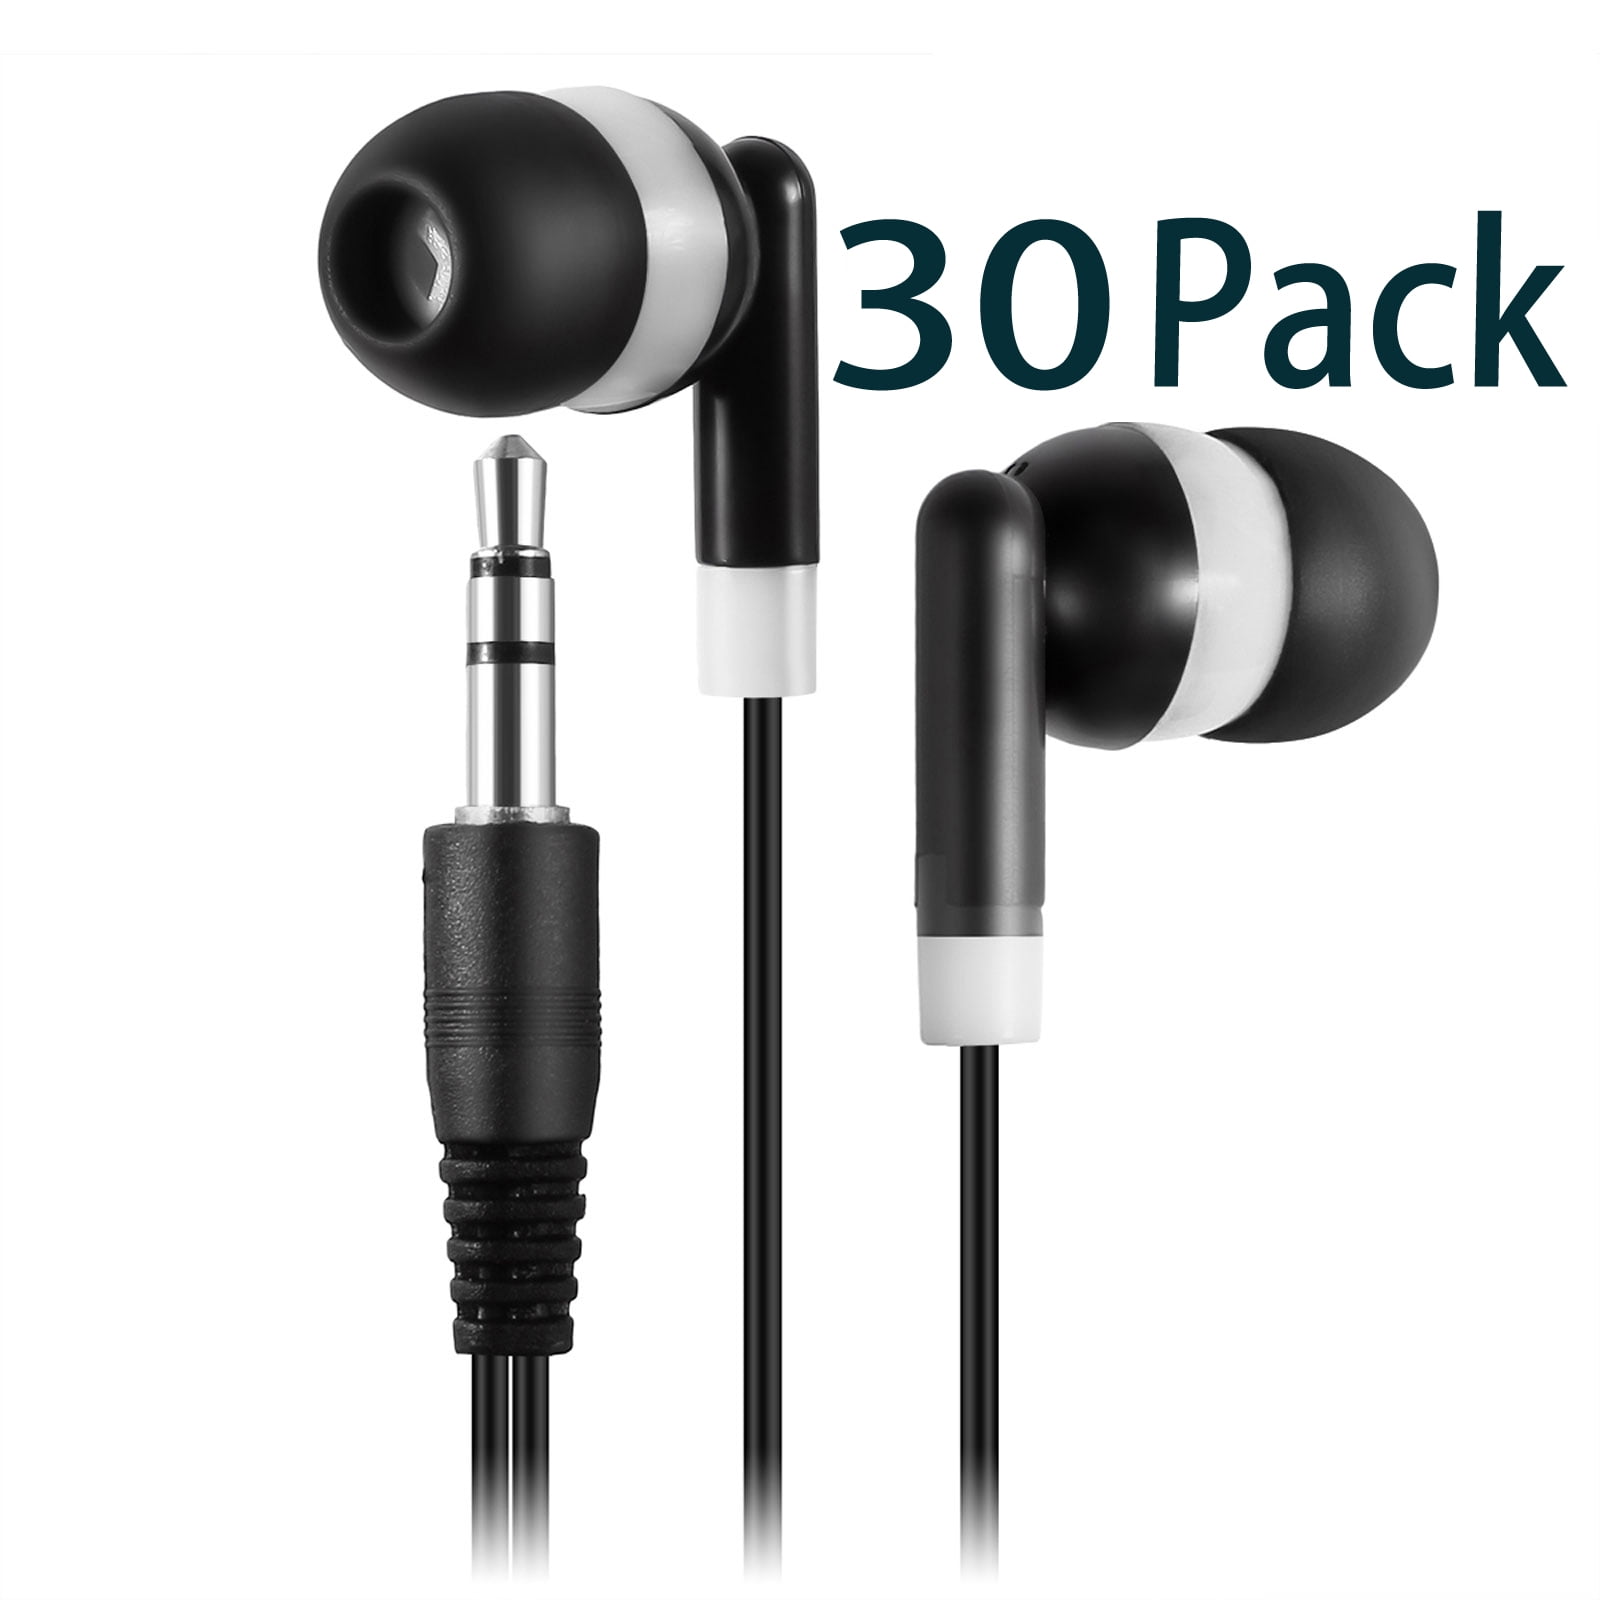 Bulk Earbuds 50 Pack Multi Colored for Classroom Kids Child Teen Factorymall Wholesale Disposable Earbuds Earphones Headphones for School,Students,Library Computer Lab,Donate 